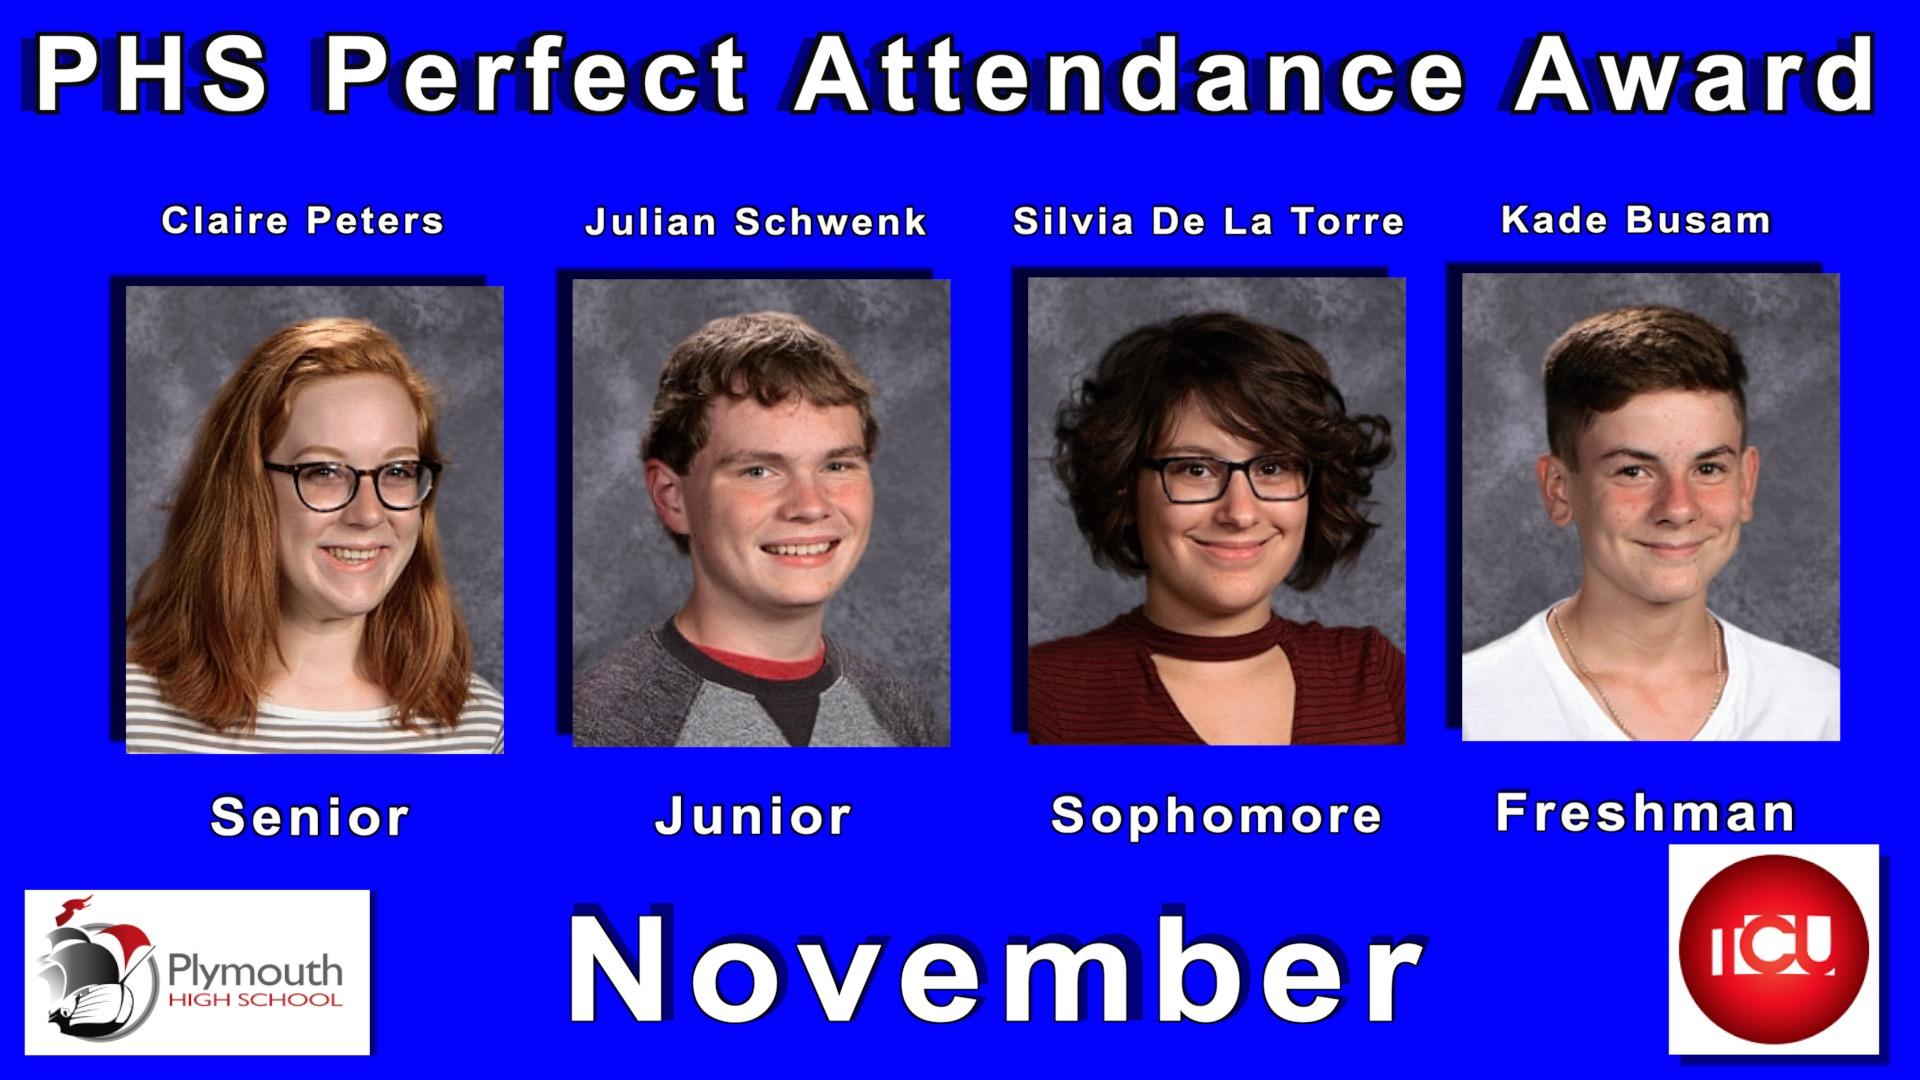 Plymouth High School would like to recognize the following students, senior Claire Peters, junior Julian Schwenk, sophomore Silvia De La Torre and freshman Kade Busam. All four students were randomly selected out of the hundreds of PHS students who had perfect attendance during the month of November.